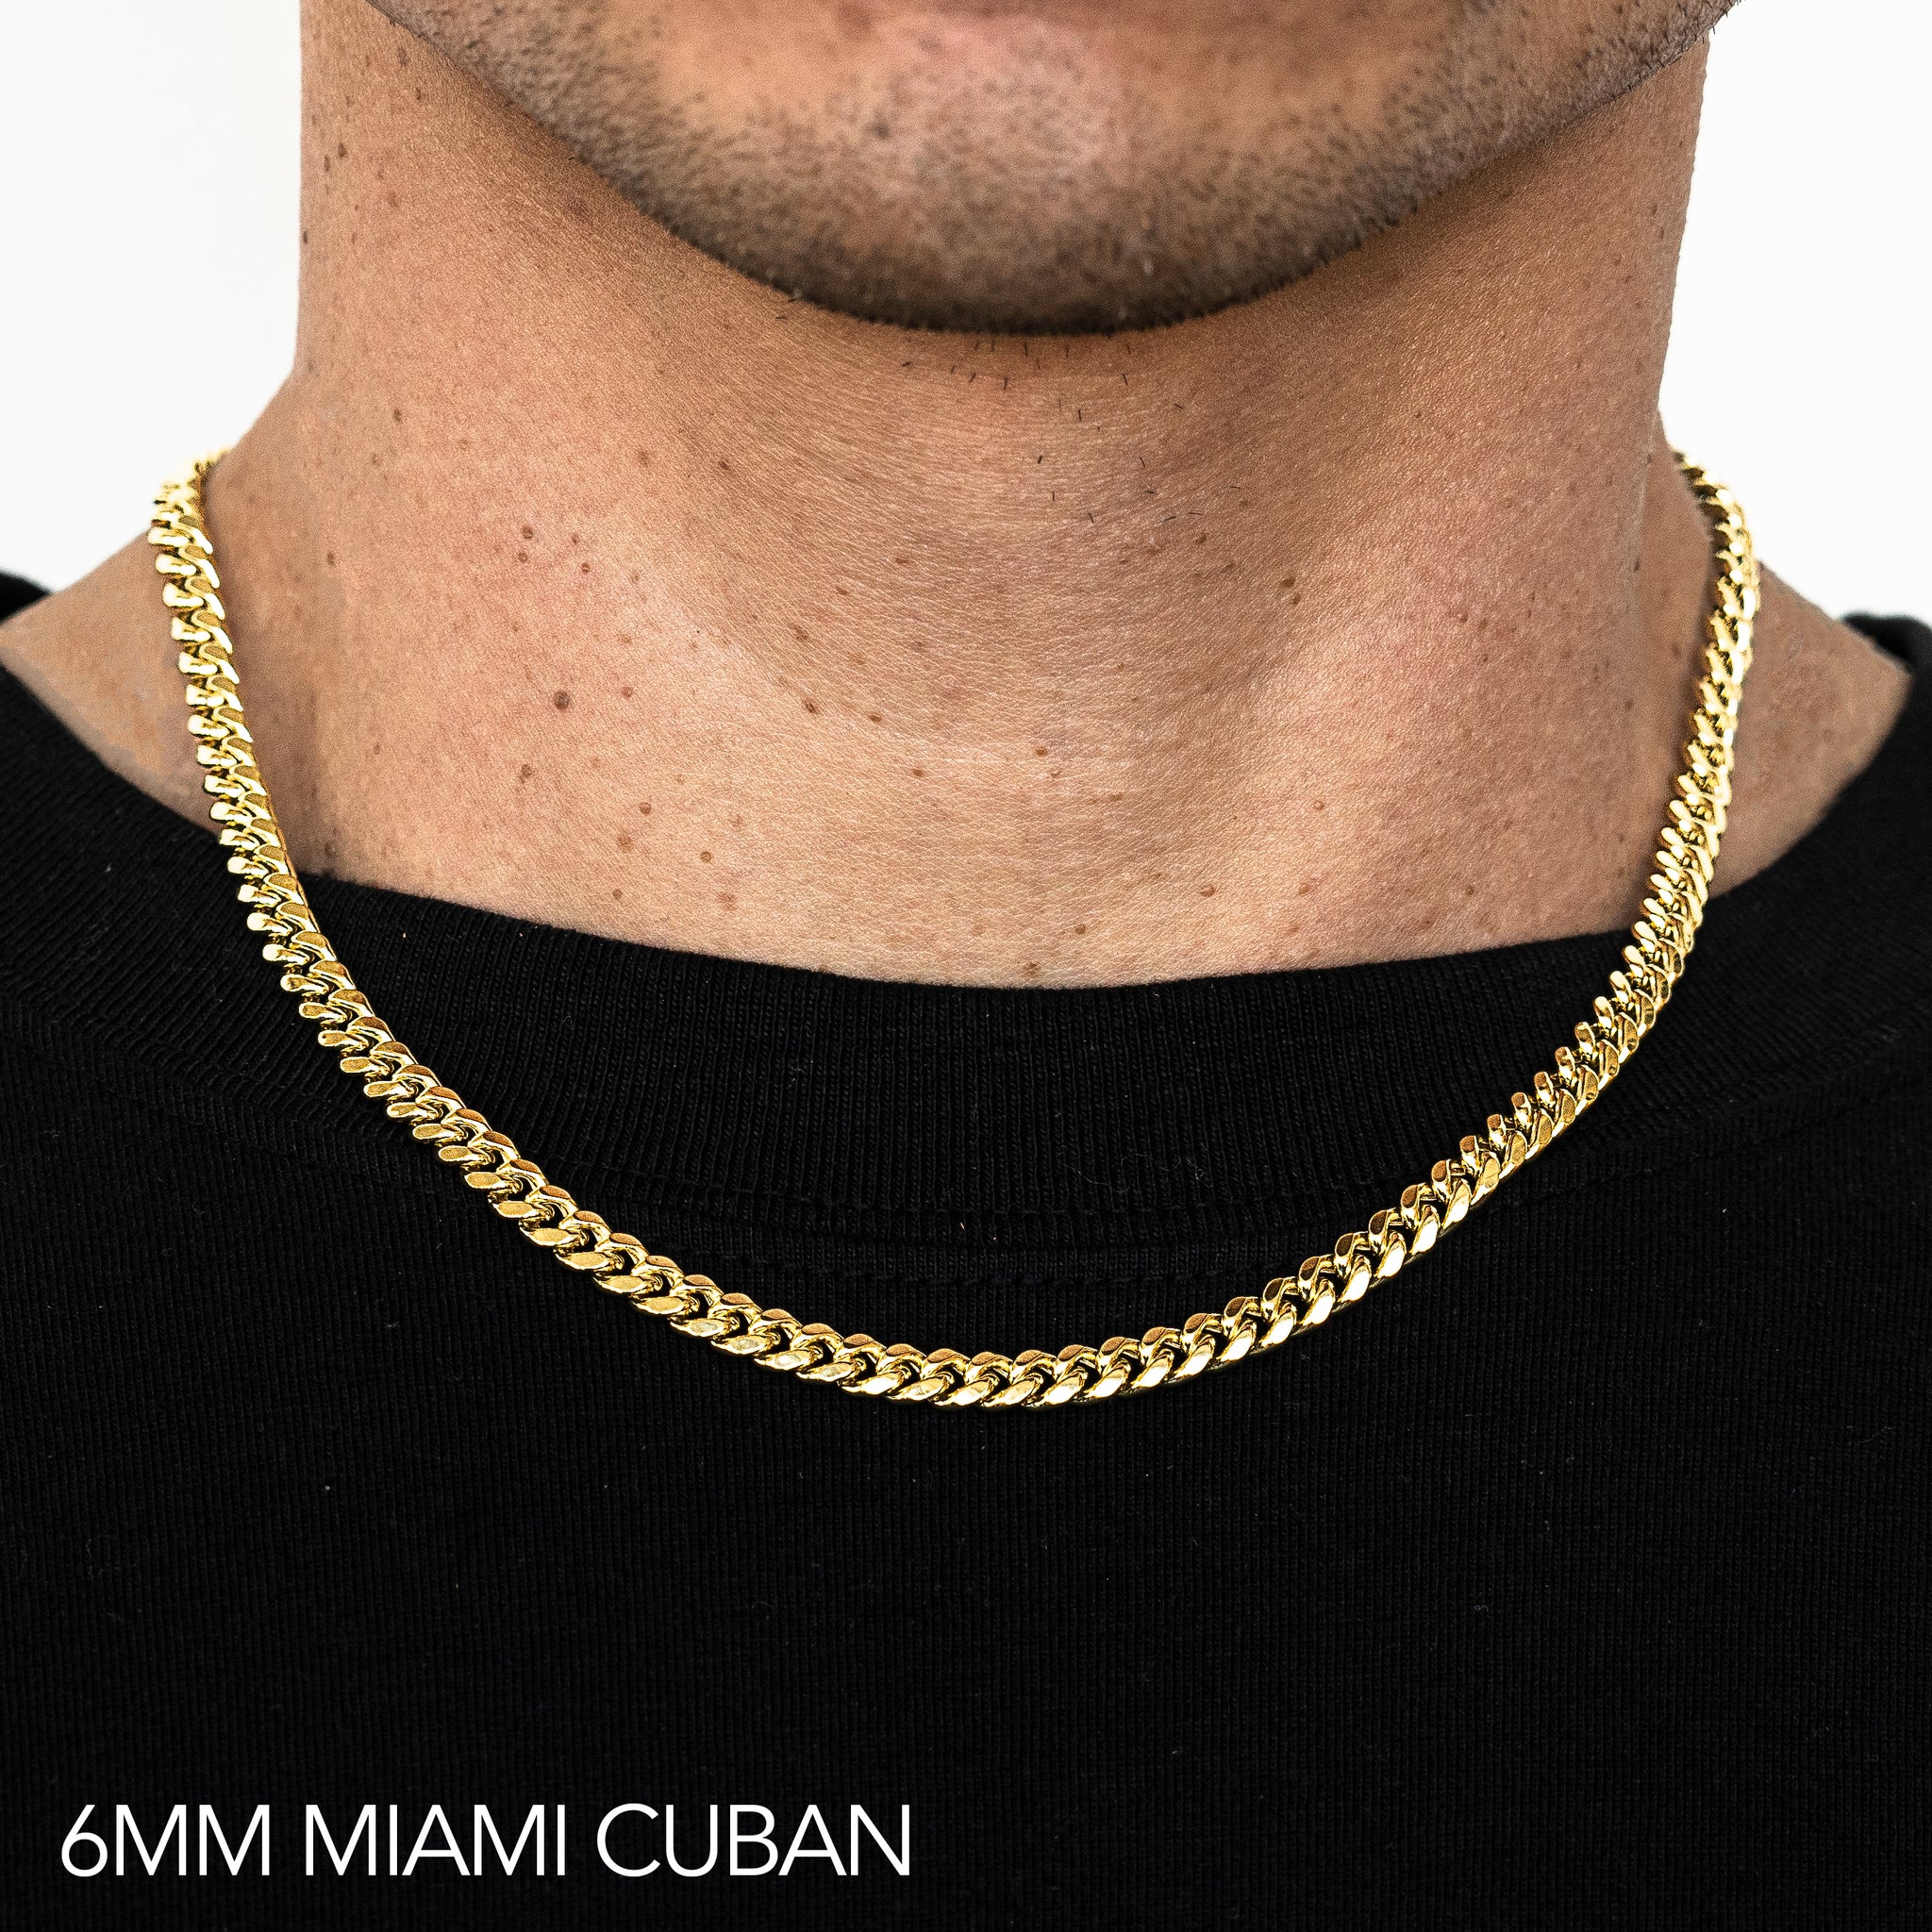 18K 6MM YELLOW GOLD SOLID MIAMI CUBAN 18" CHAIN NECKLACE (AVAILABLE IN LENGTHS 7" - 30")